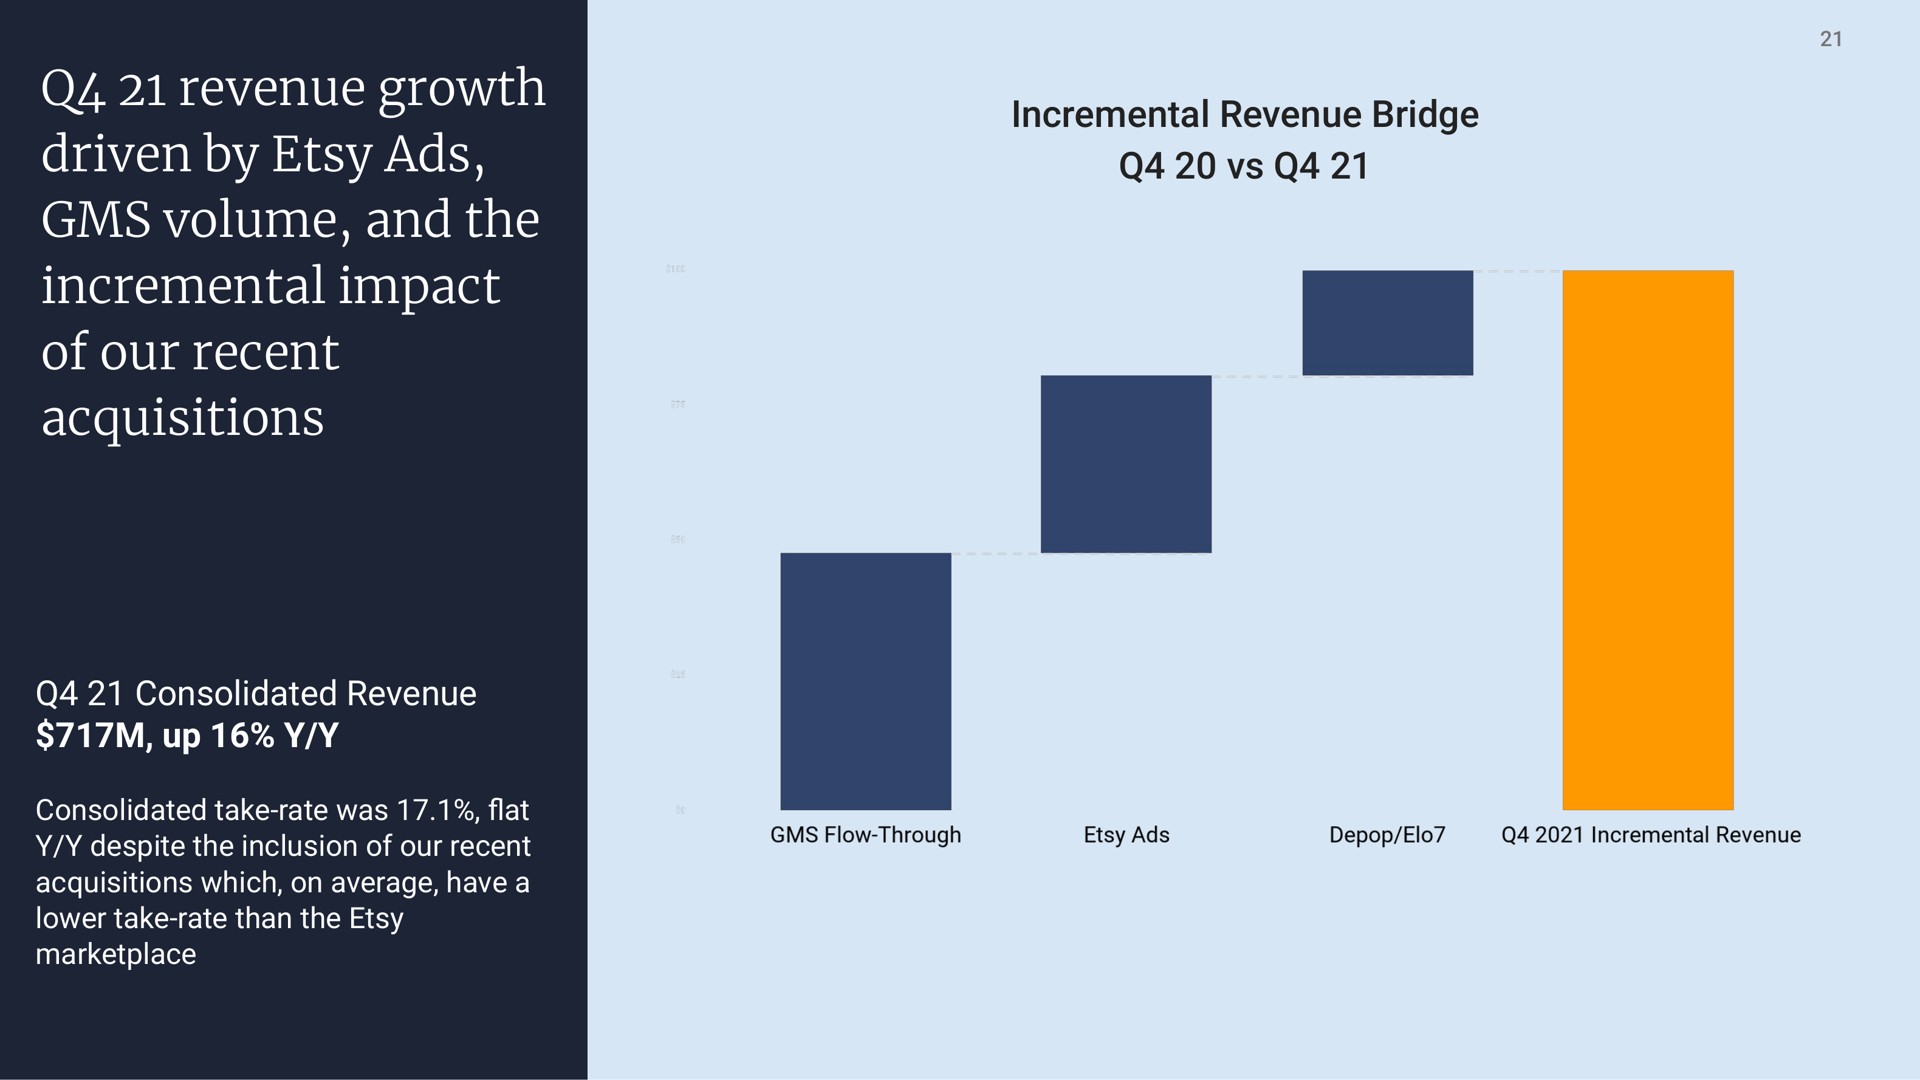 revenue growth driven by ads volume and the incremental impact of our recent acquisitions | Etsy